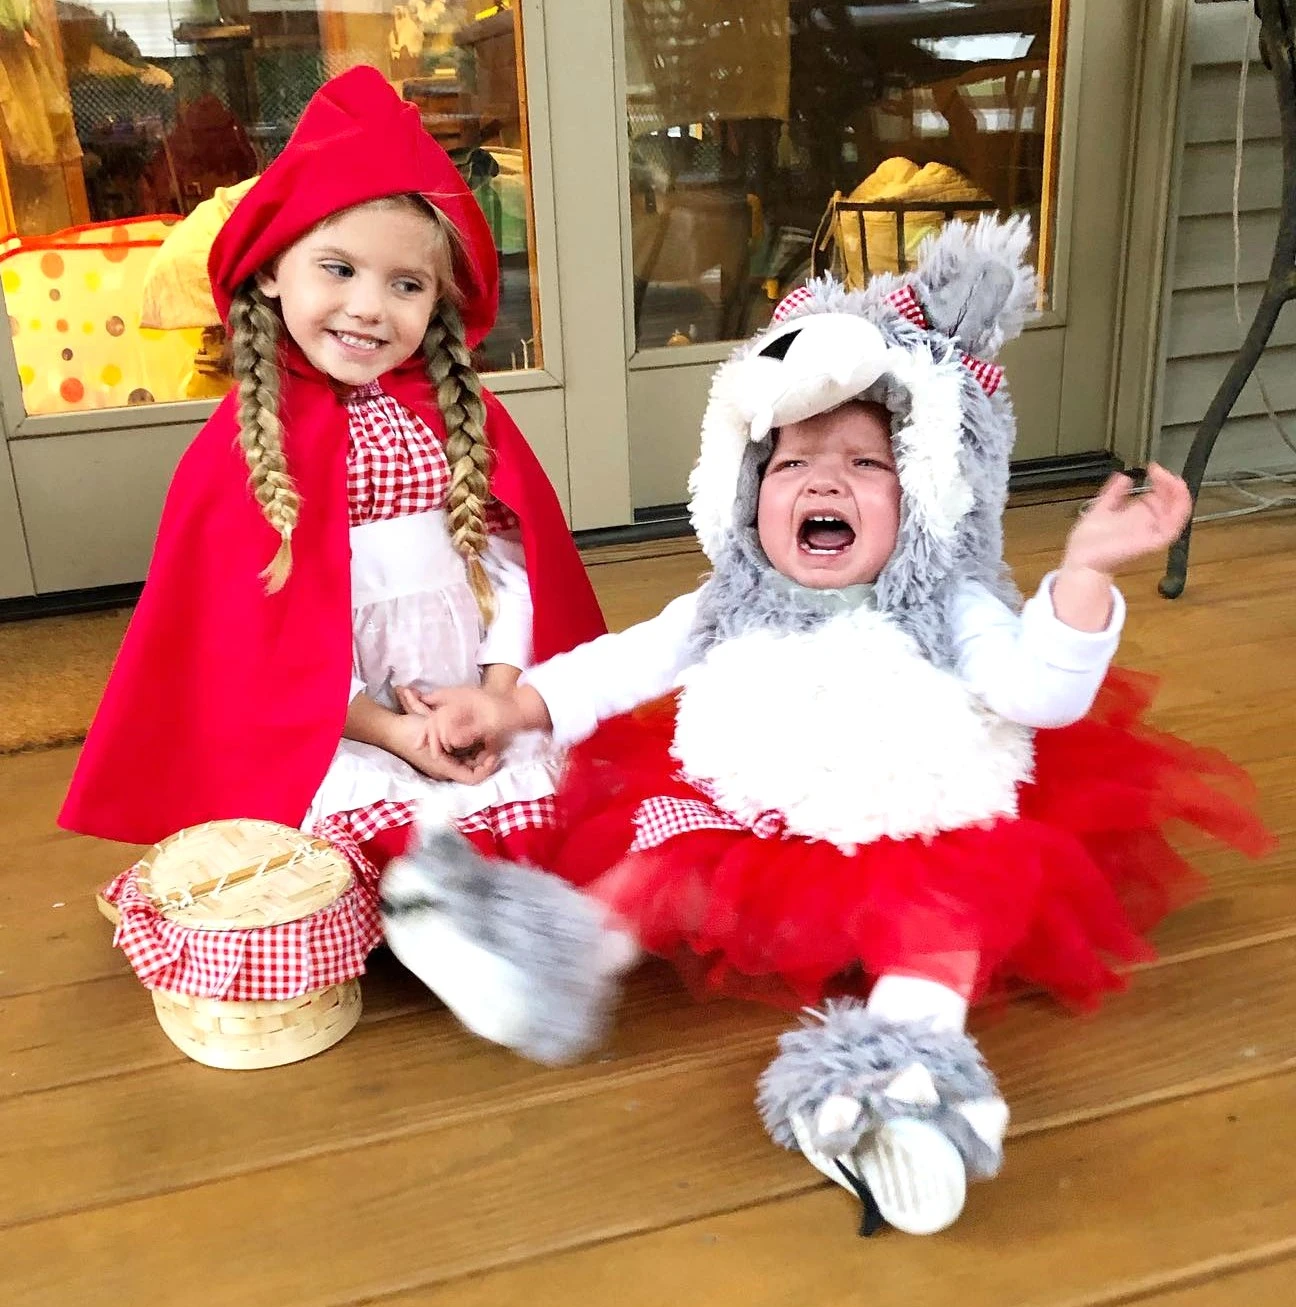 sibling Halloween costumes Red Riding Hood and Big Bad Wolf